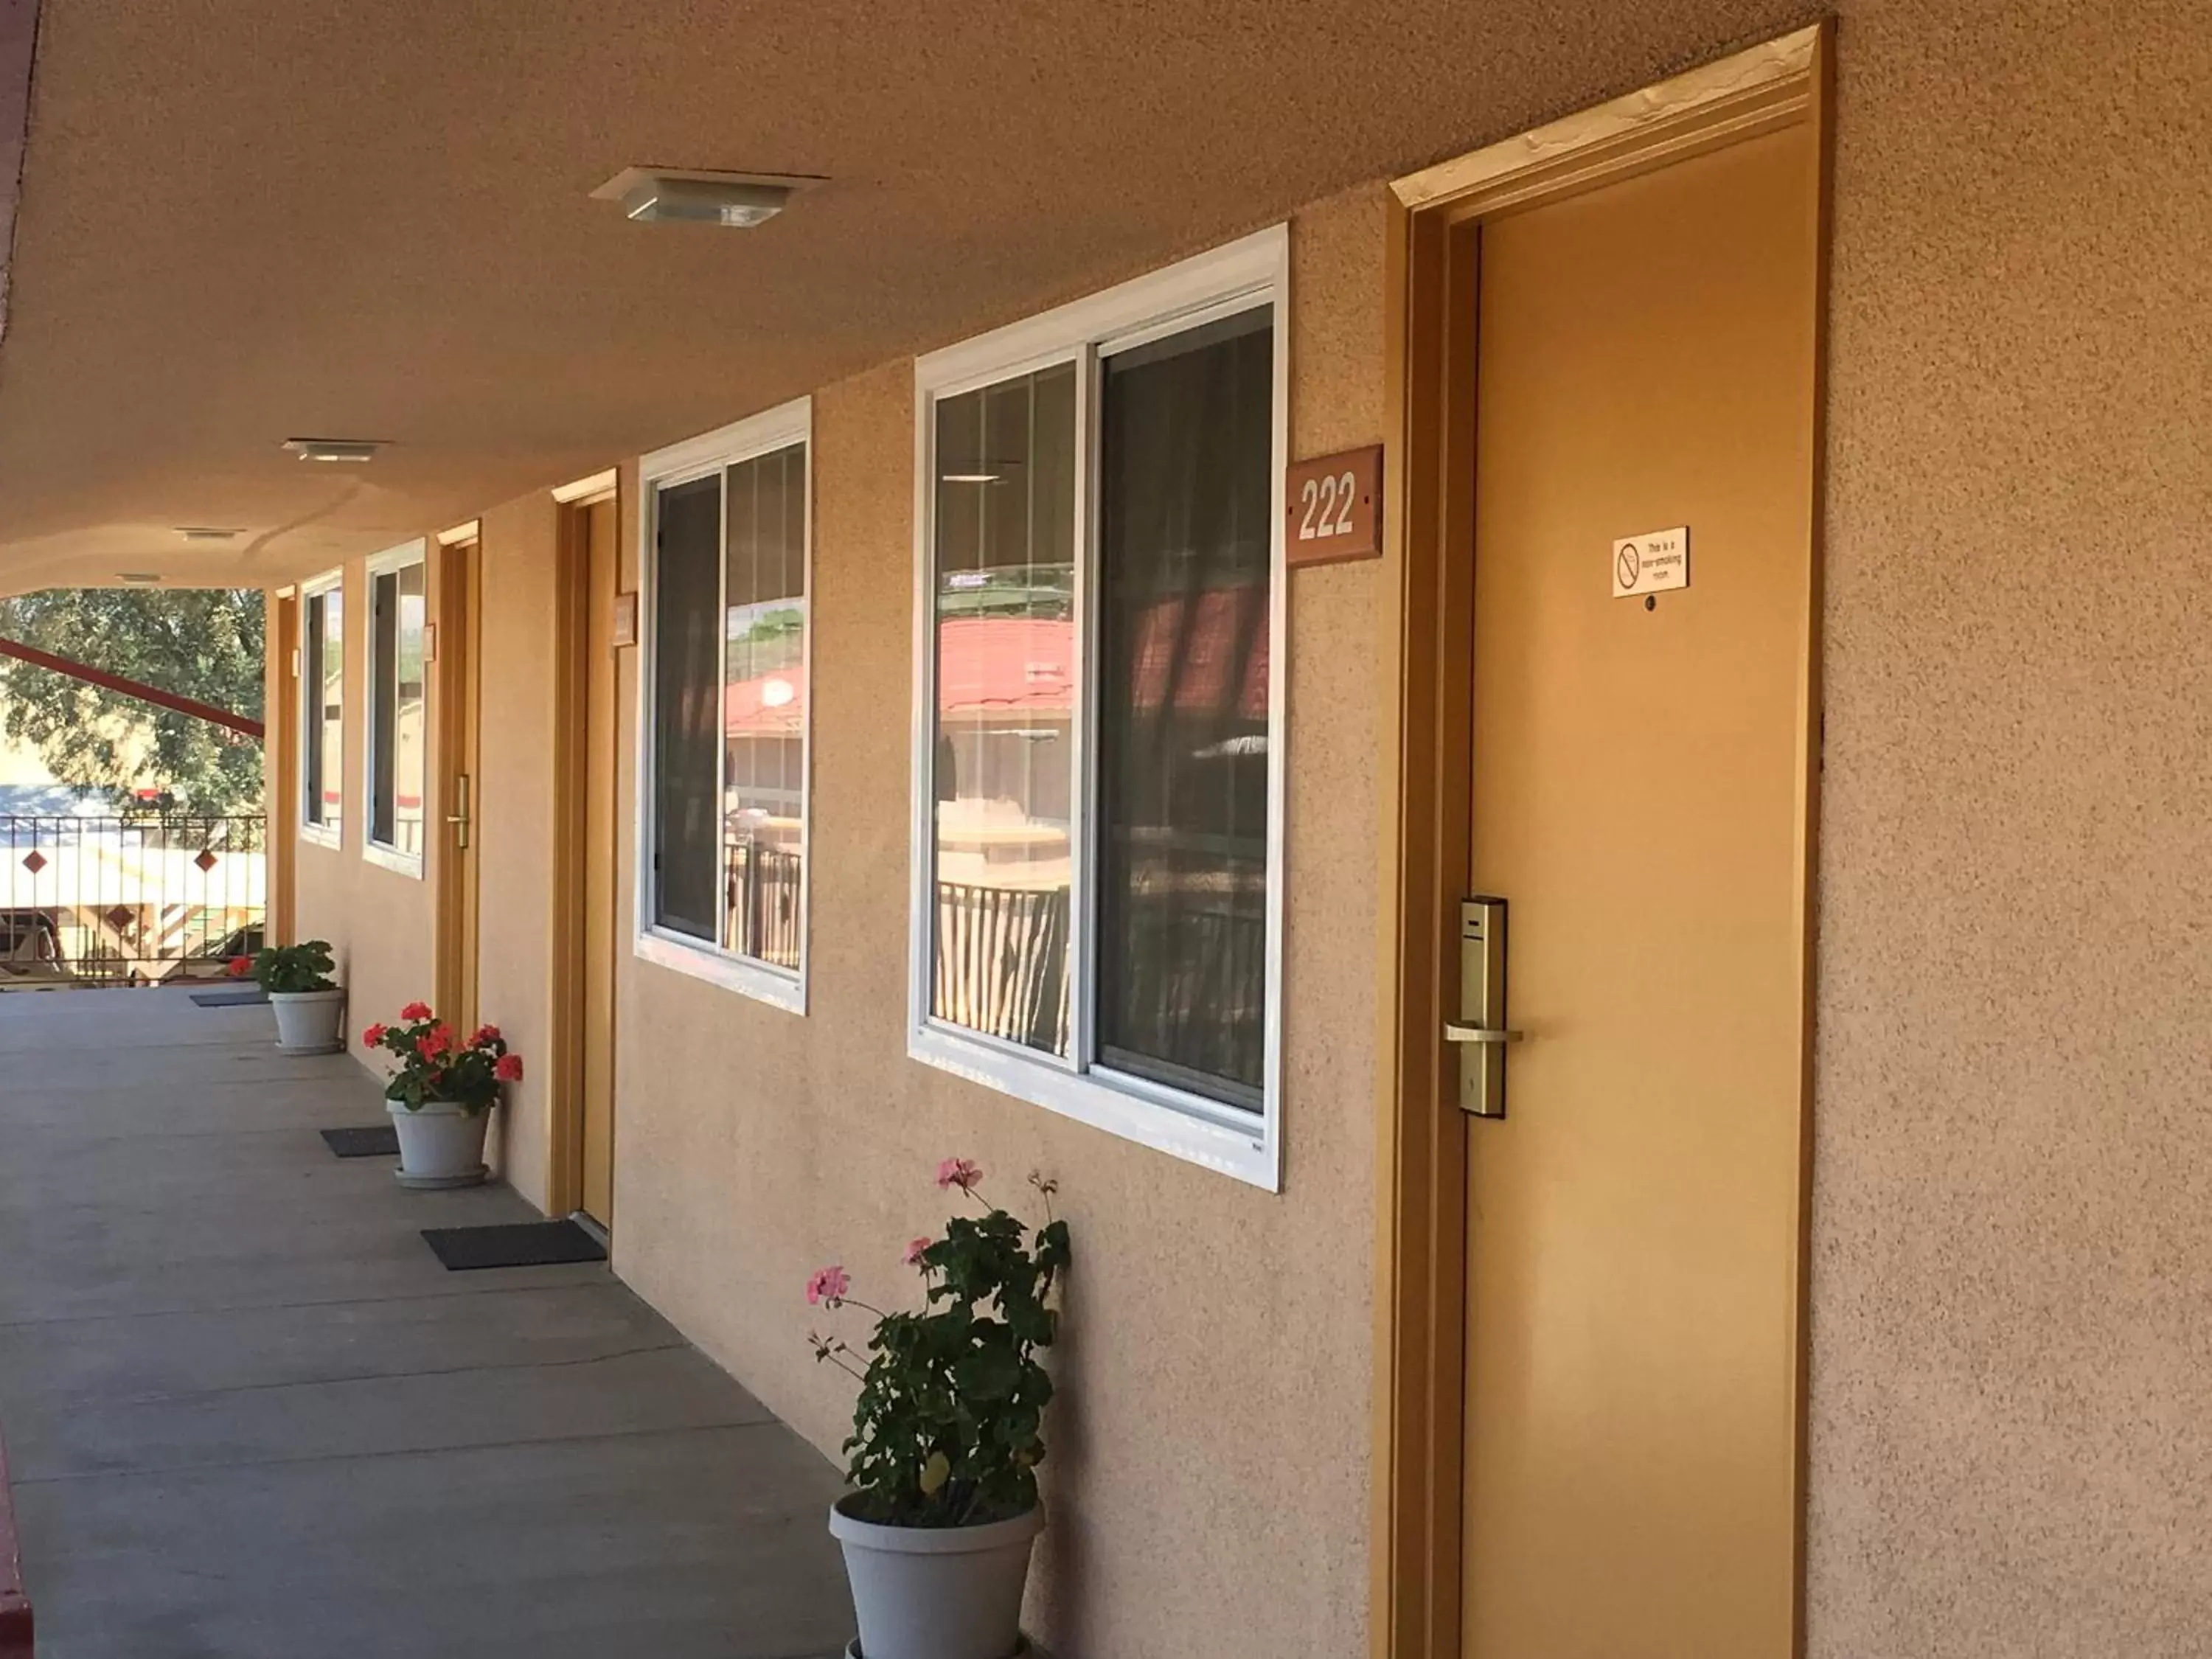 Property building in Americas Best Value Inn Beaumont California